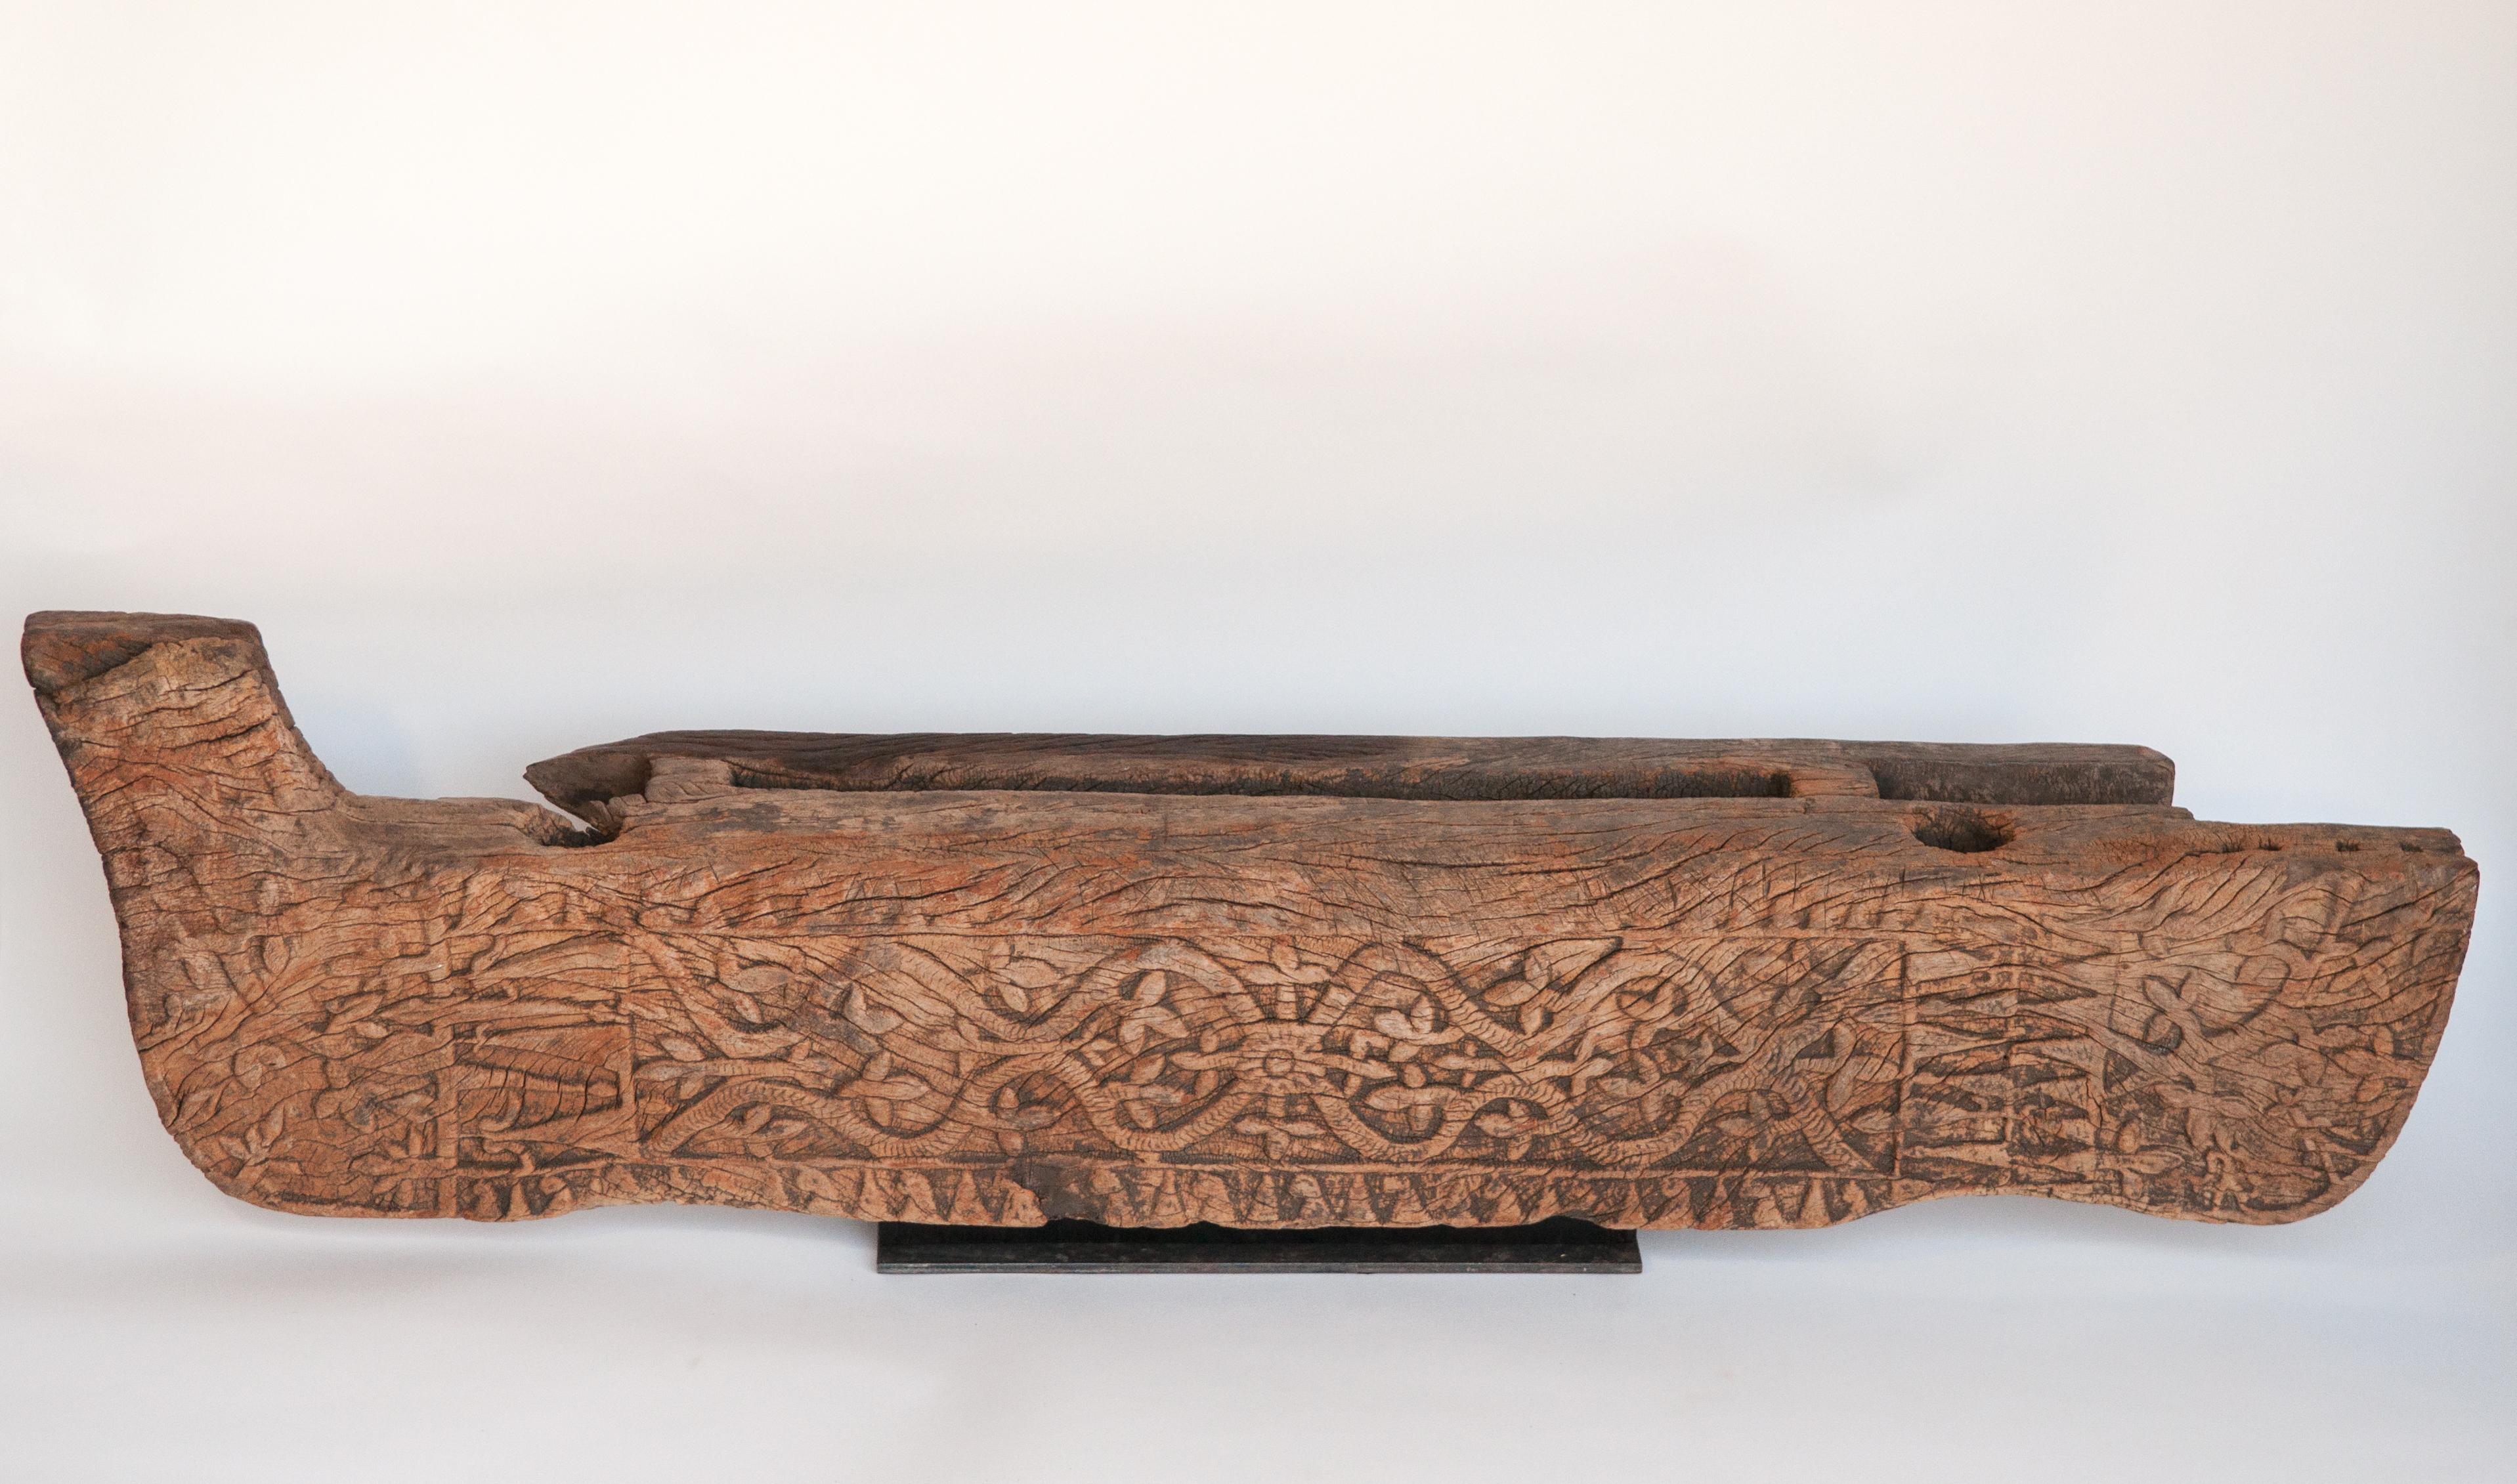 Tribal wooden carving from a door threshold. Flores, Indonesia, early-mid 20th century. Mounted on a metal and wood base.
This carving comes from Flores Island in East Indonesia, most likely from the Ngada Regency of central Flores. It served as